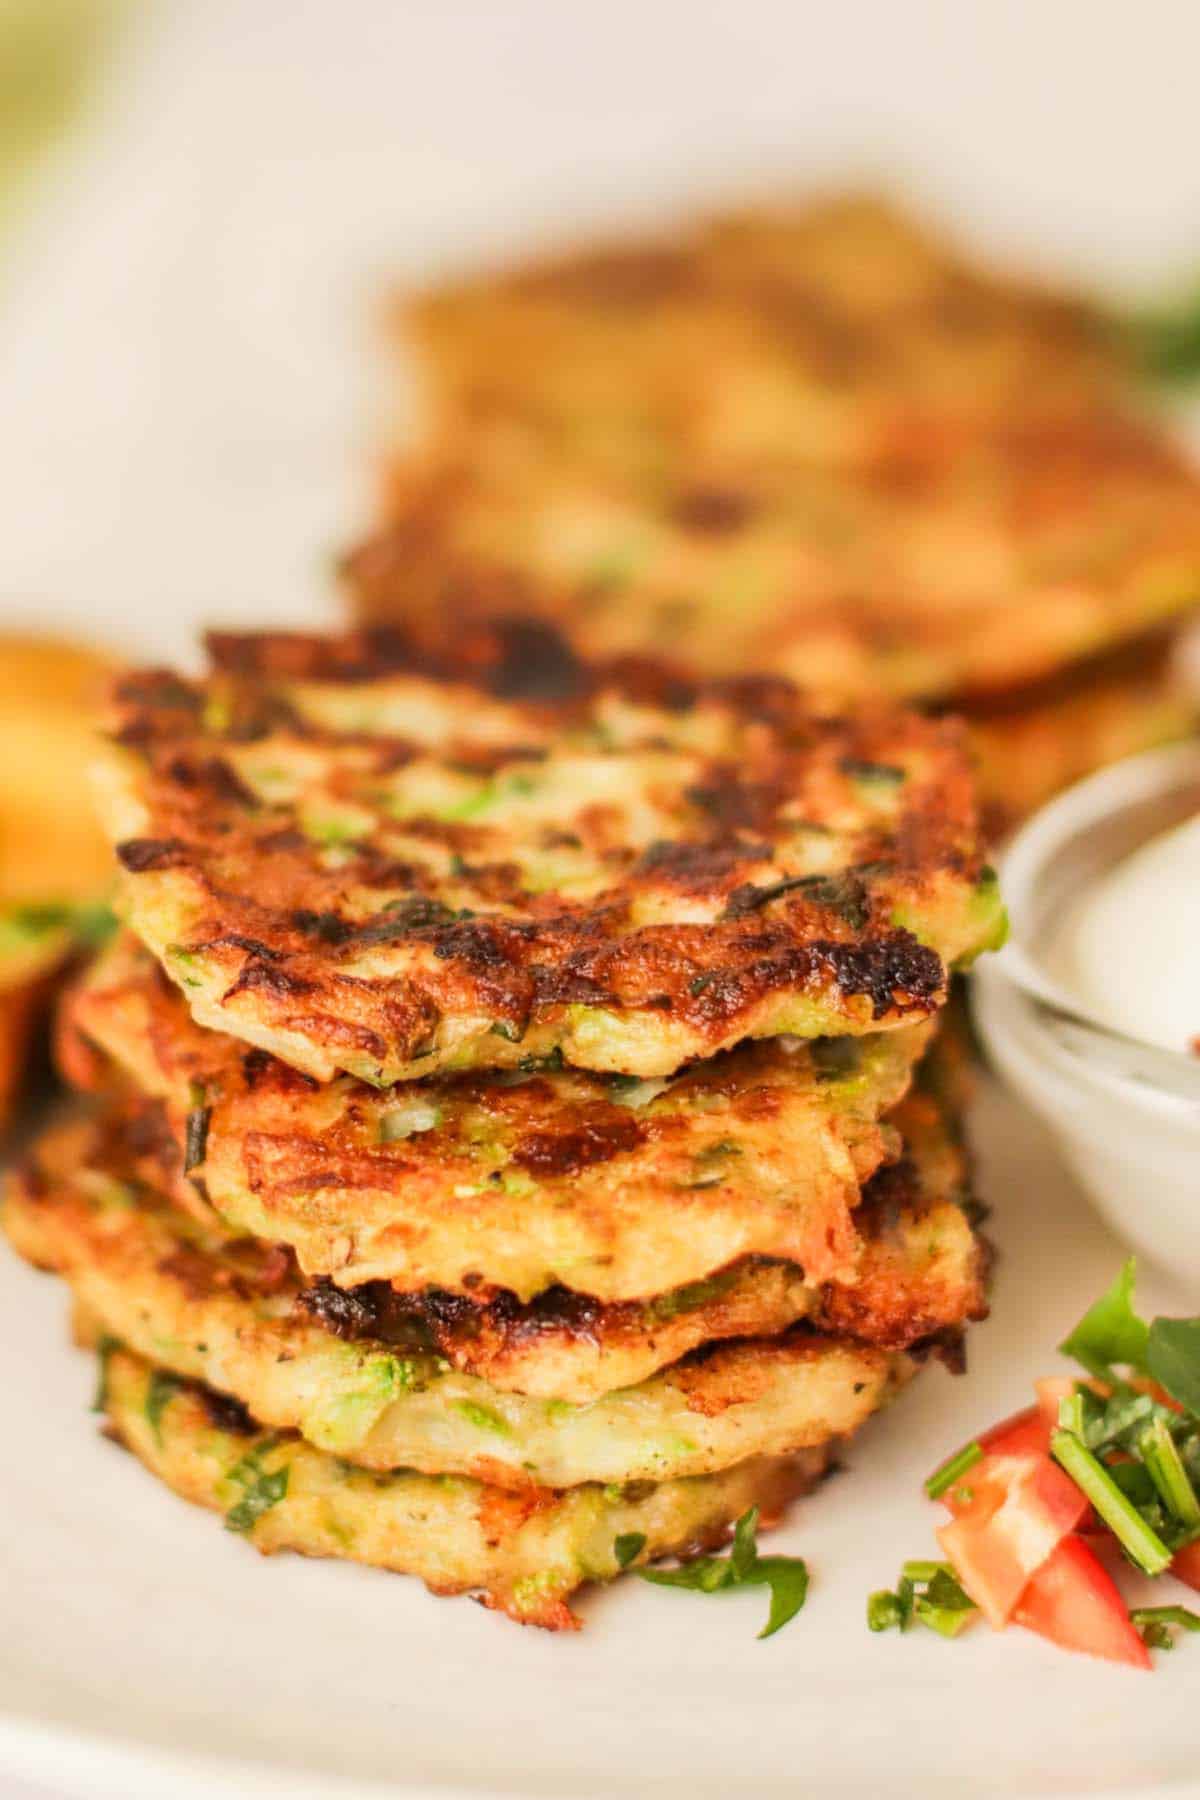 Zucchini fritters stacked on a plate next to a dipping sauce.